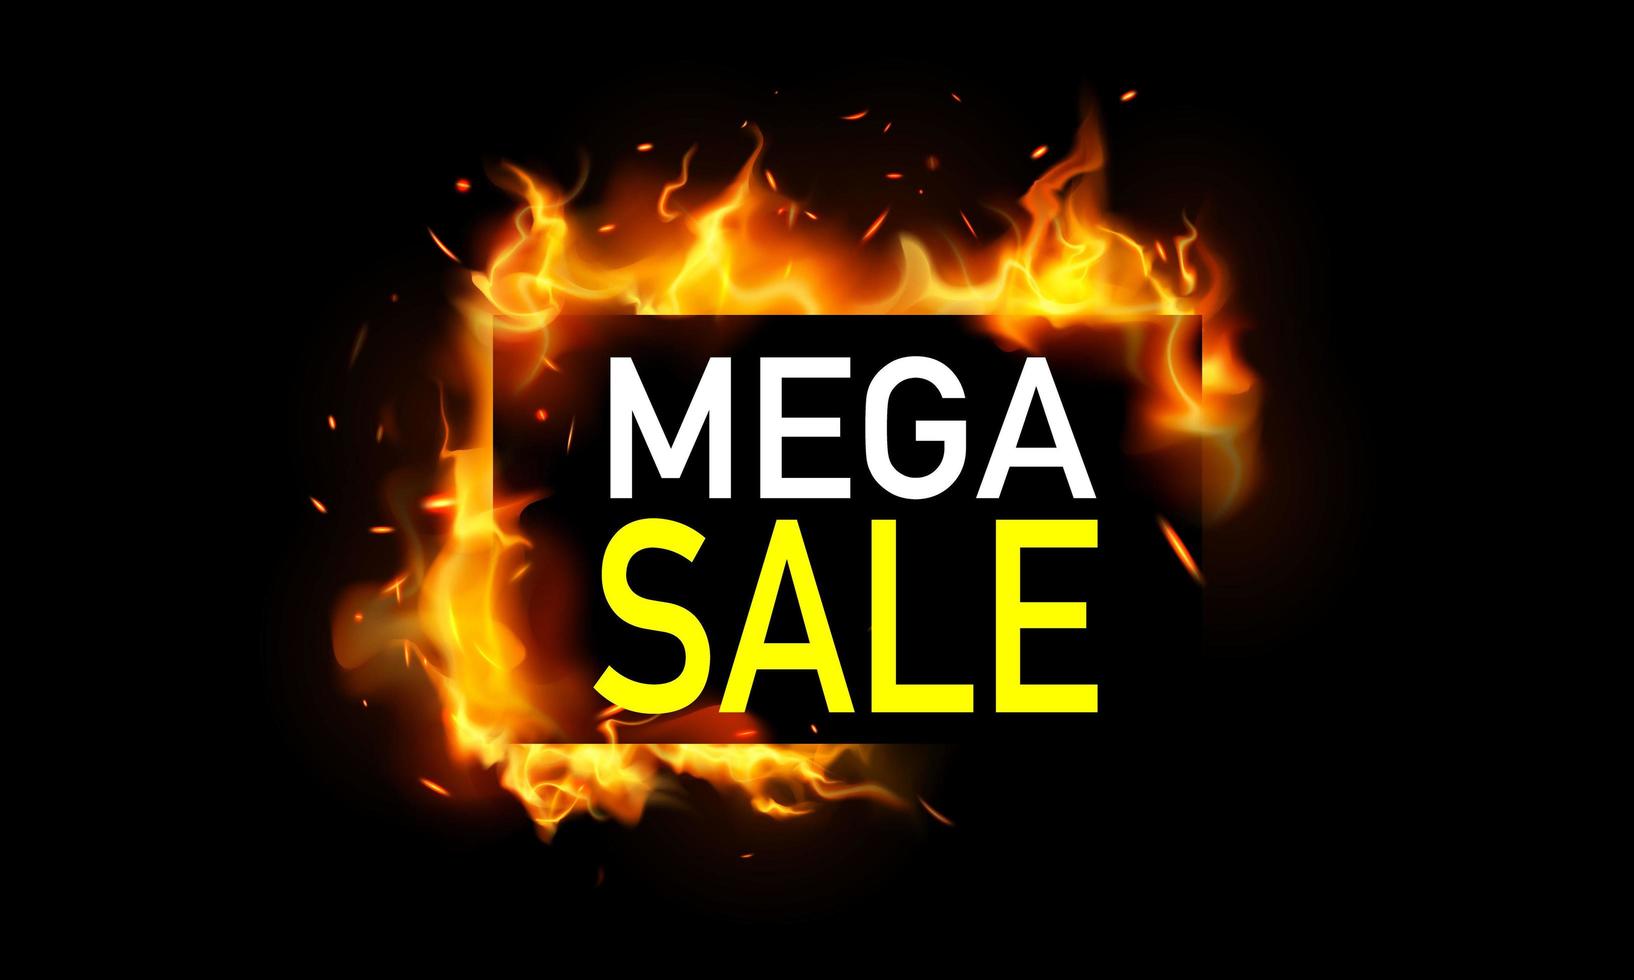 Mega sale banner with flames vector